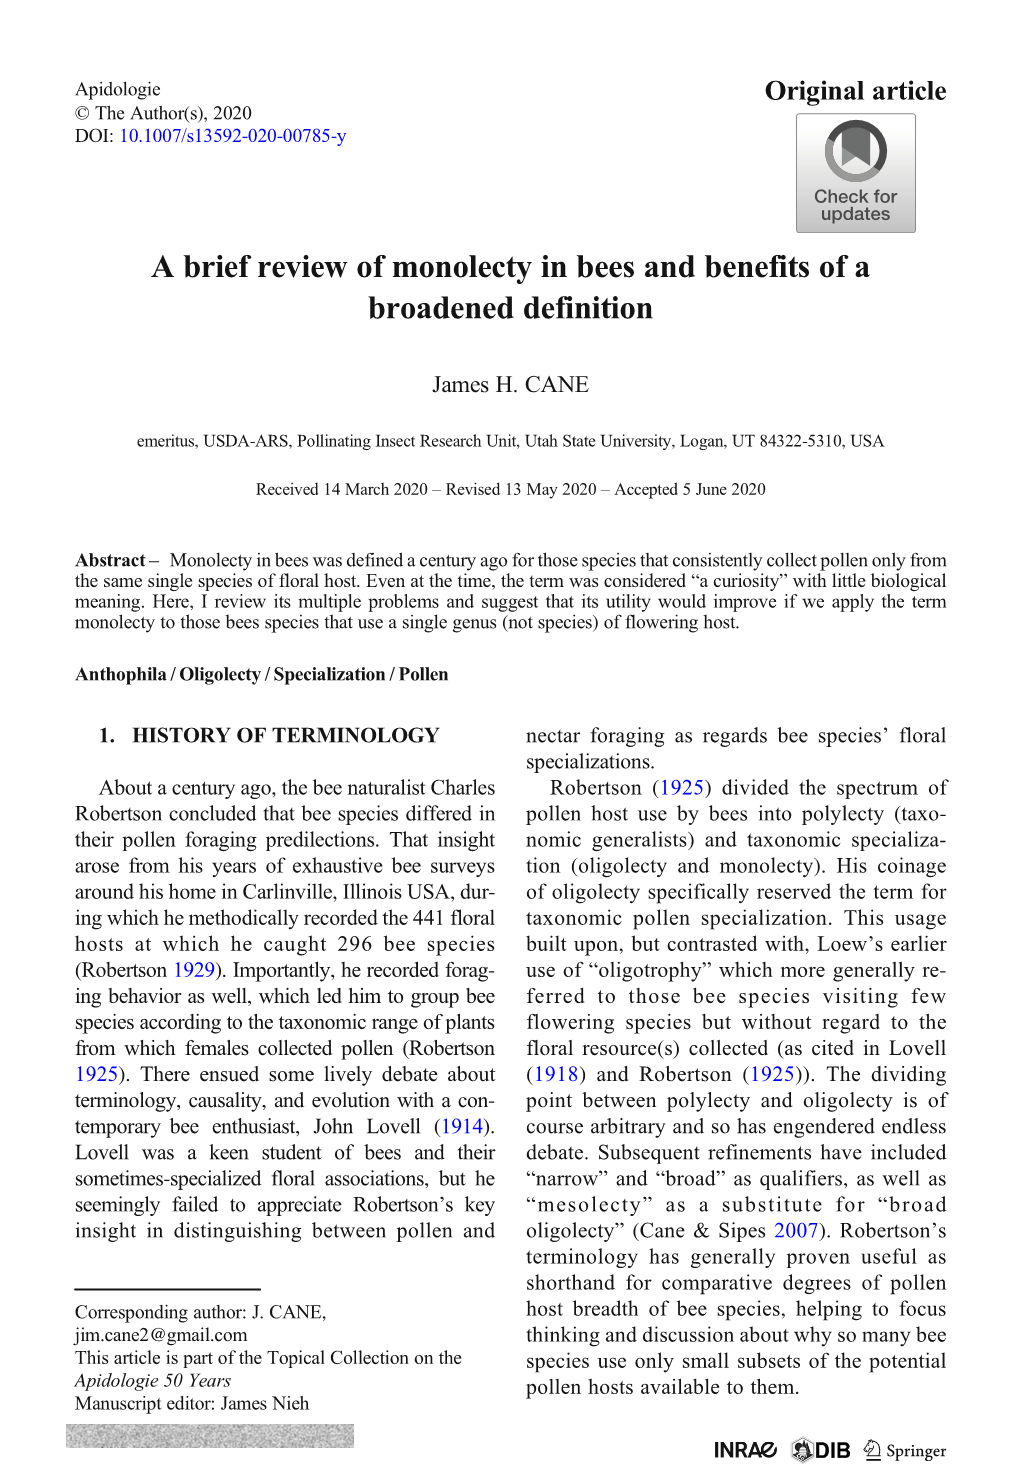 A Brief Review of Monolecty in Bees and Benefits of a Broadened Definition